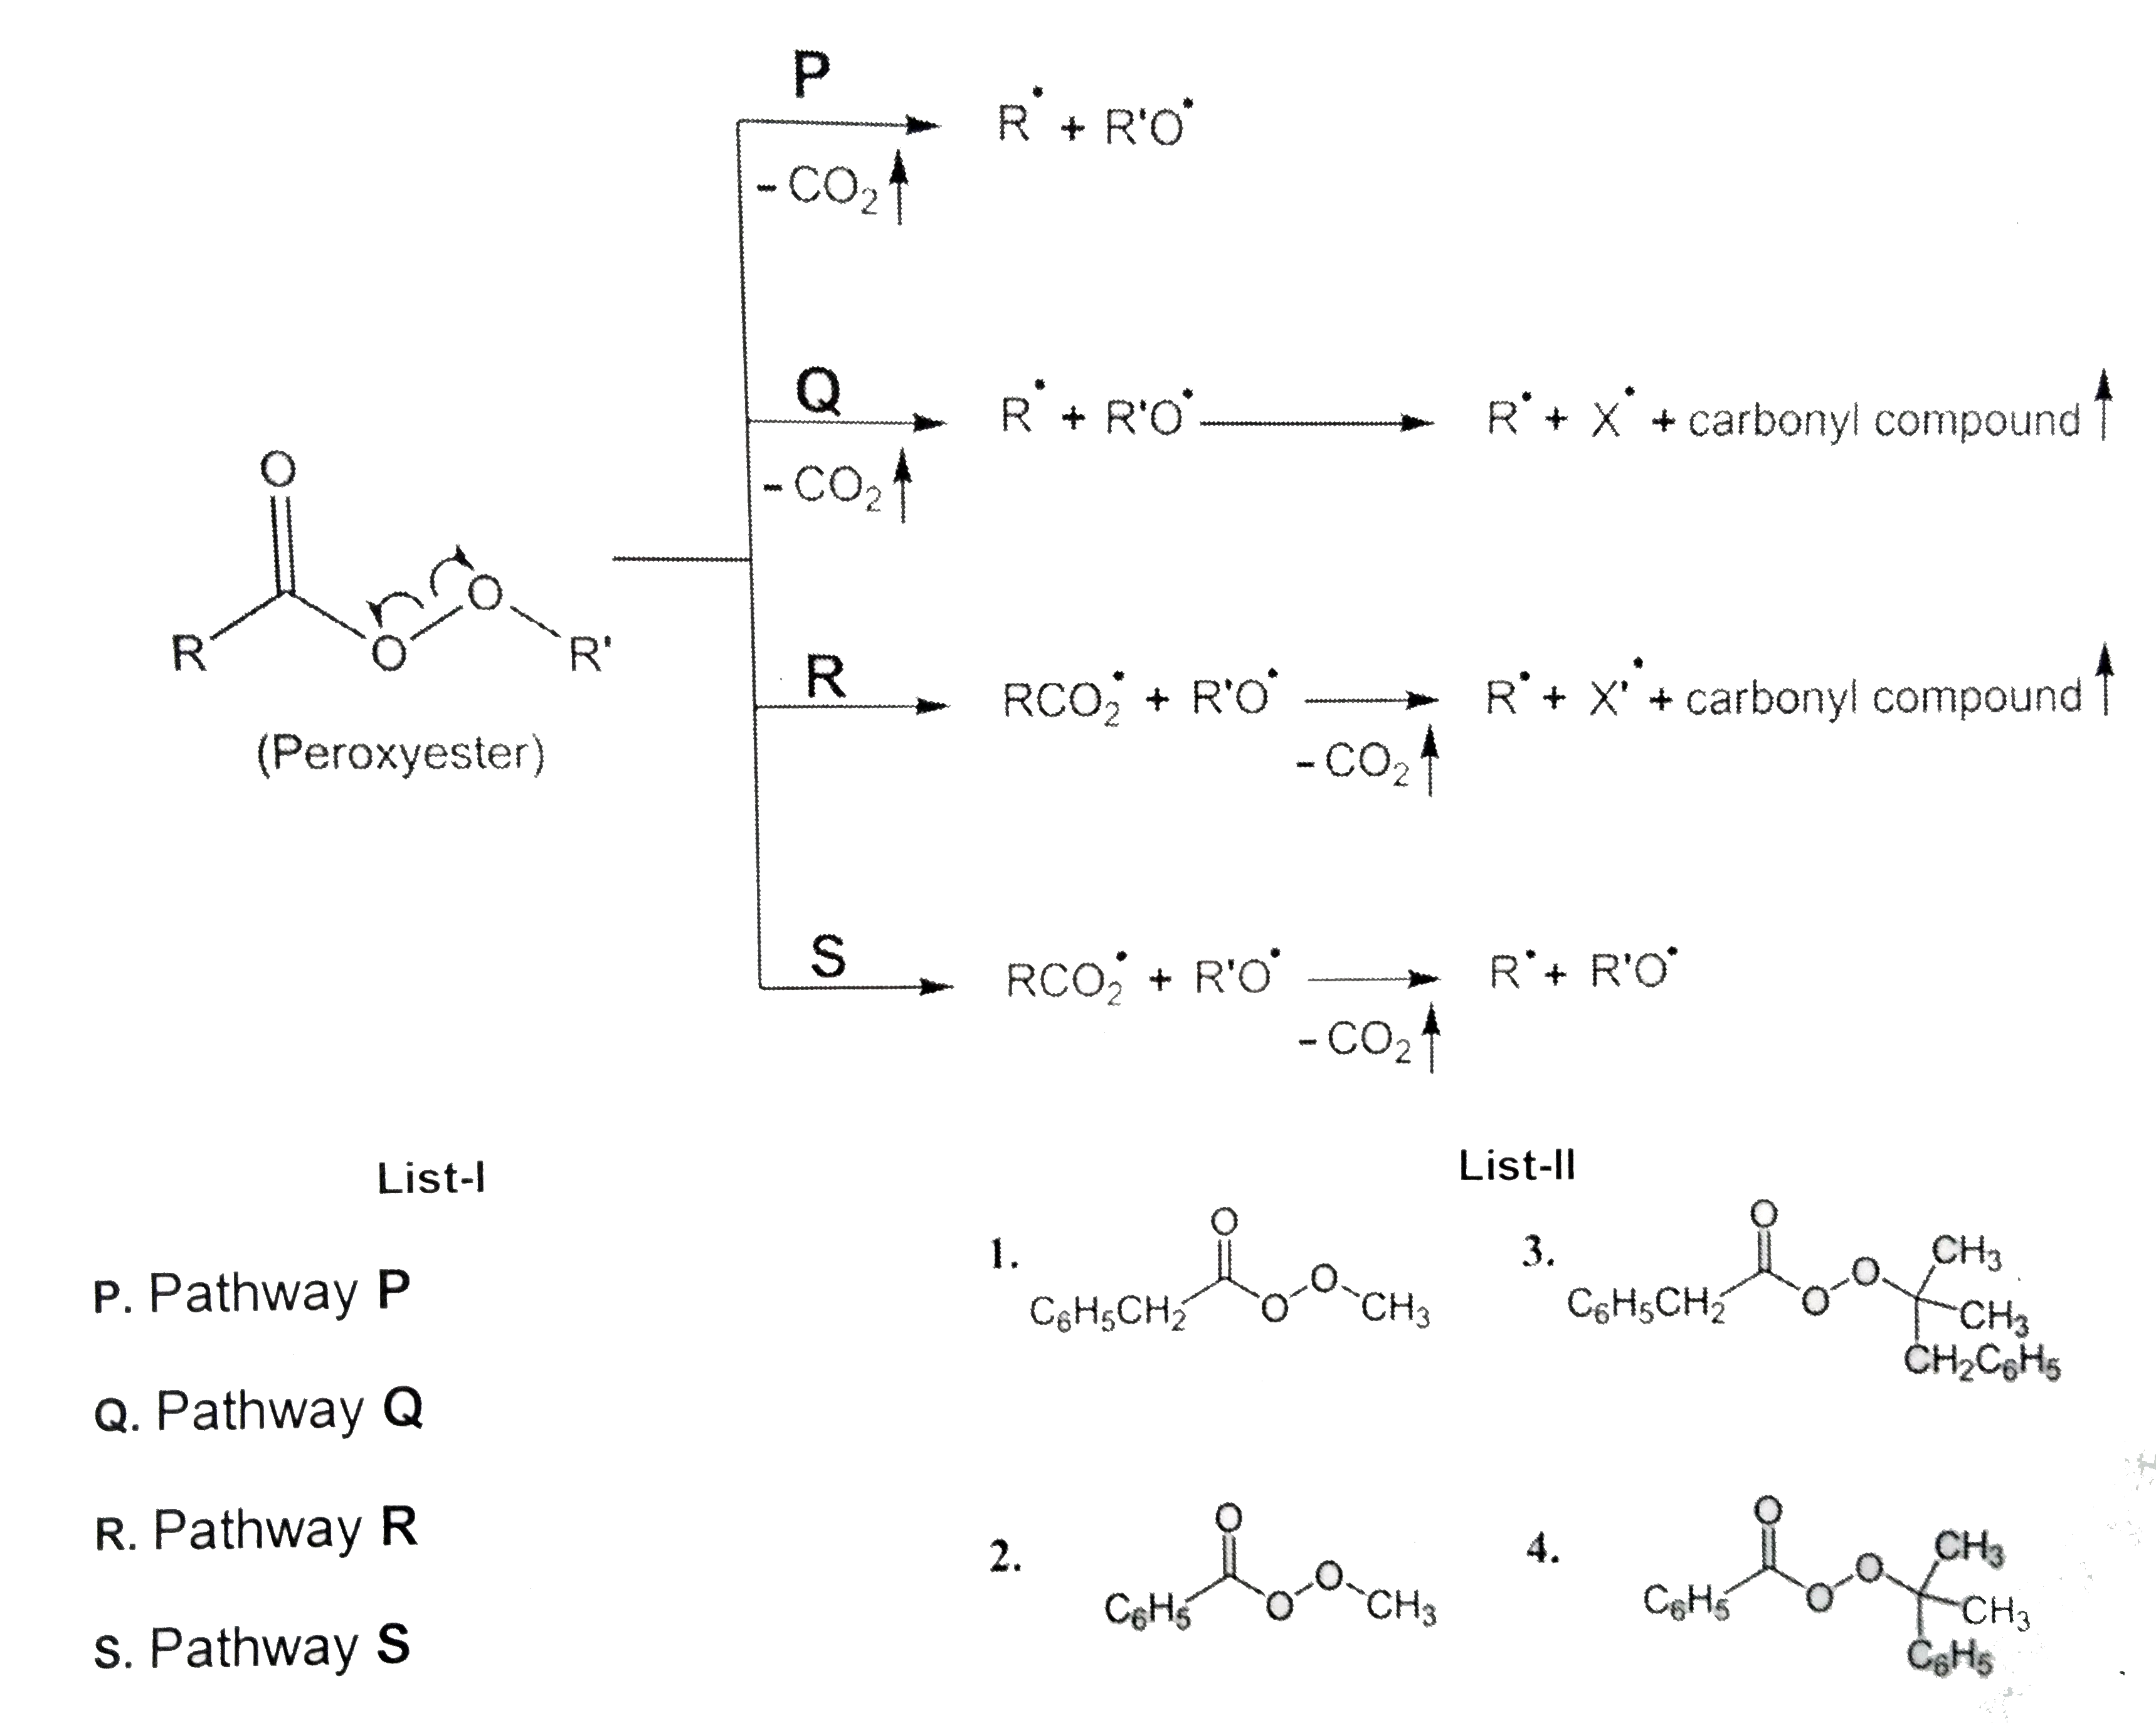 Different possible thermal  decomposition pathways for peroxyesters are shown below. Match each pathway from List I with an appropriate structure from List II and select the correct answer using the code given below the lists.